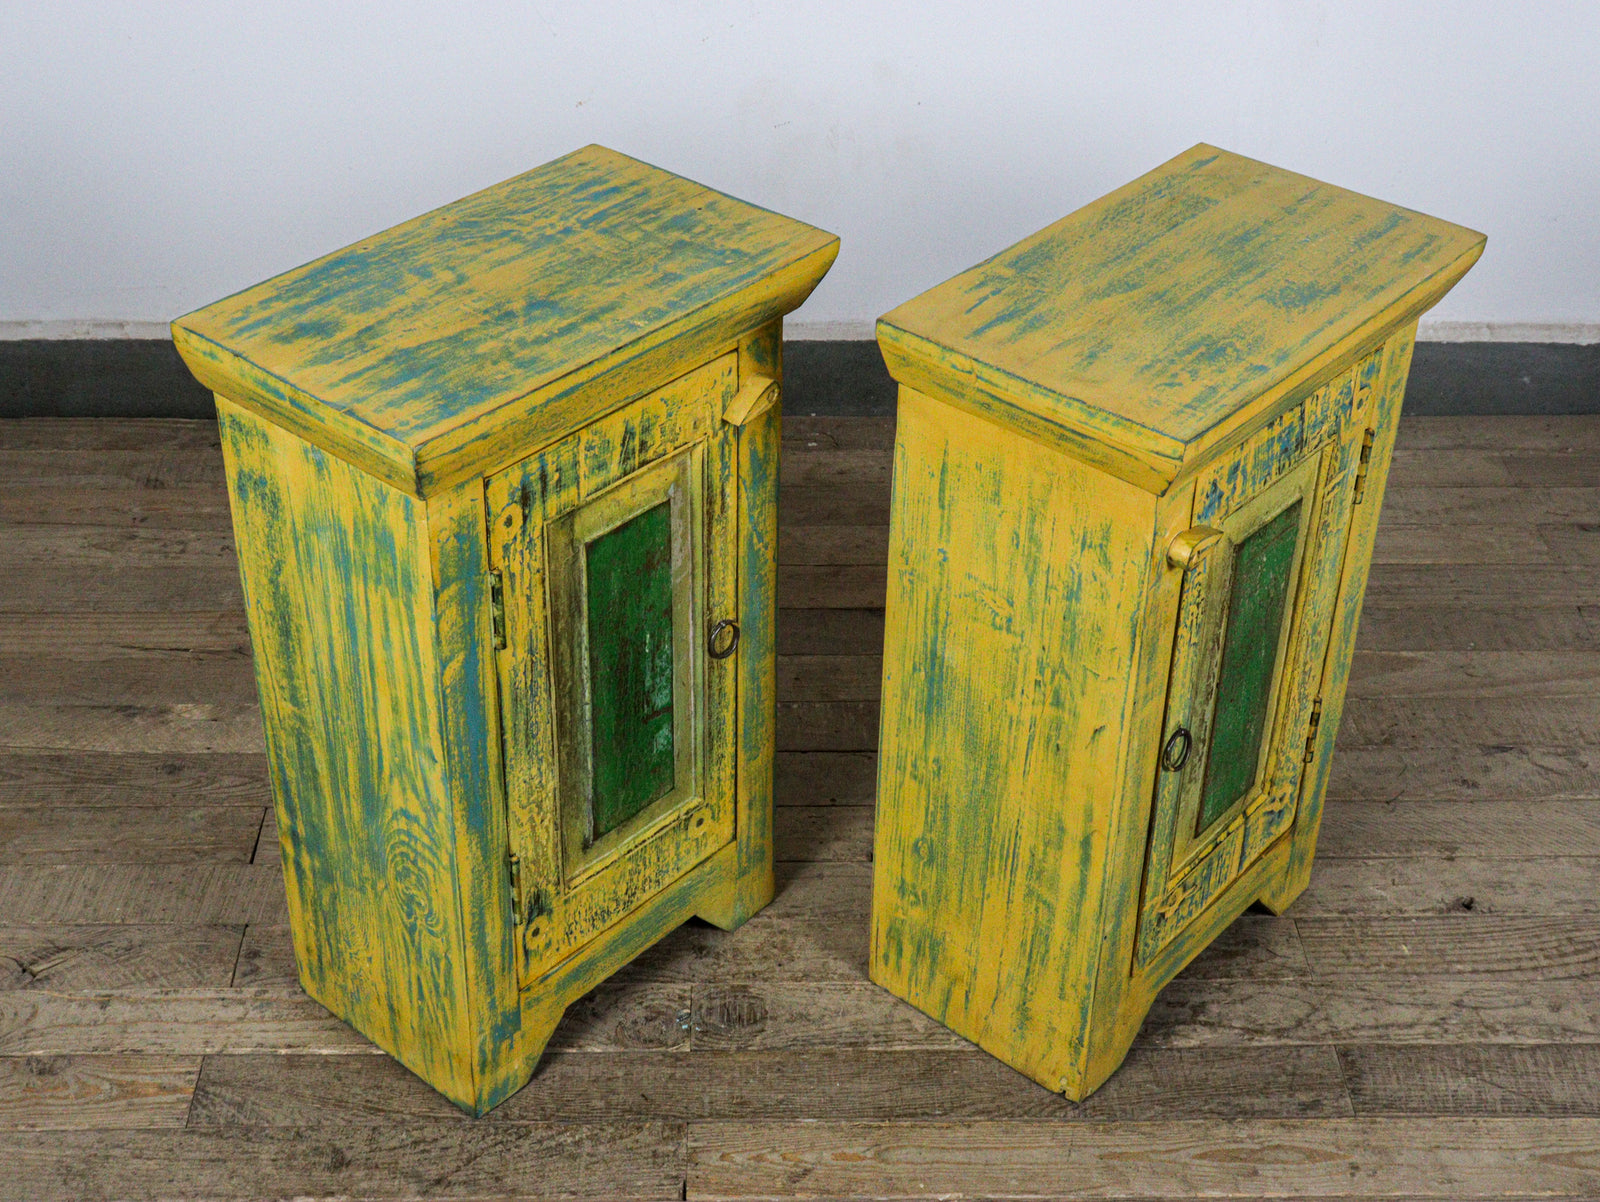 MILL-1356/69 Pair of Bedside Cabinet